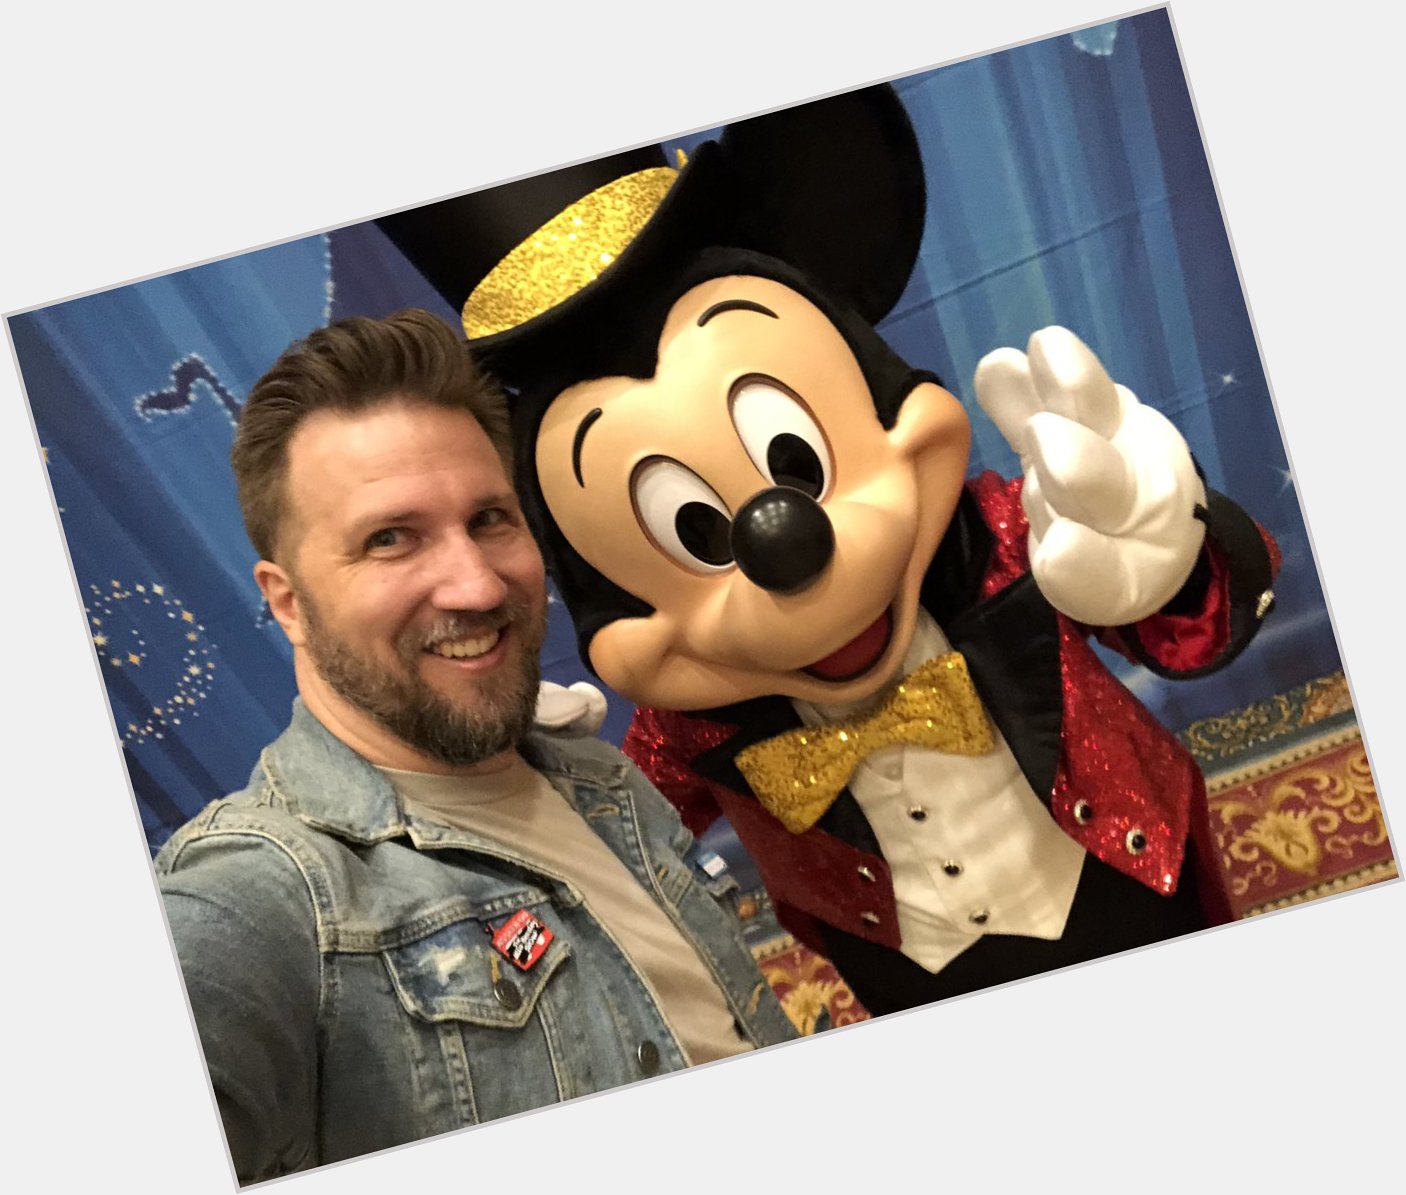 Happy Birthday, Bret Iwan, the voice of Mickey Mouse!   